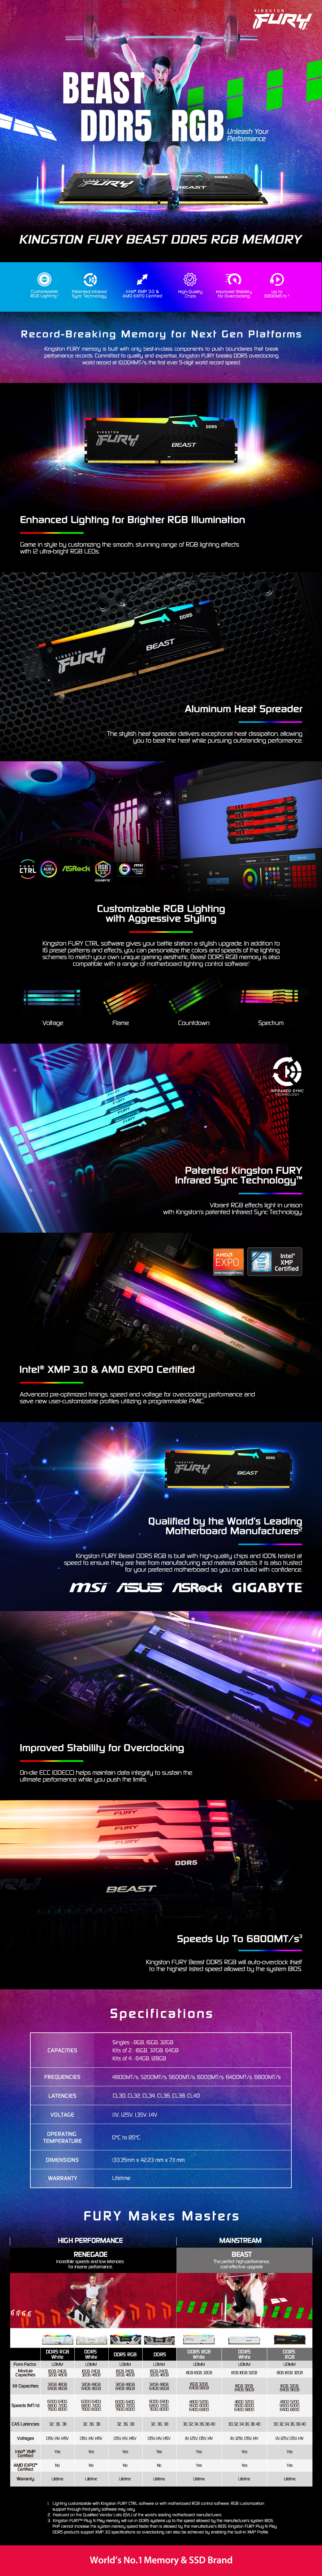 A large marketing image providing additional information about the product Kingston 64GB Kit (2x32GB) DDR5 Fury Beast EXPO/XMP RGB CL32 6400MHz - Additional alt info not provided